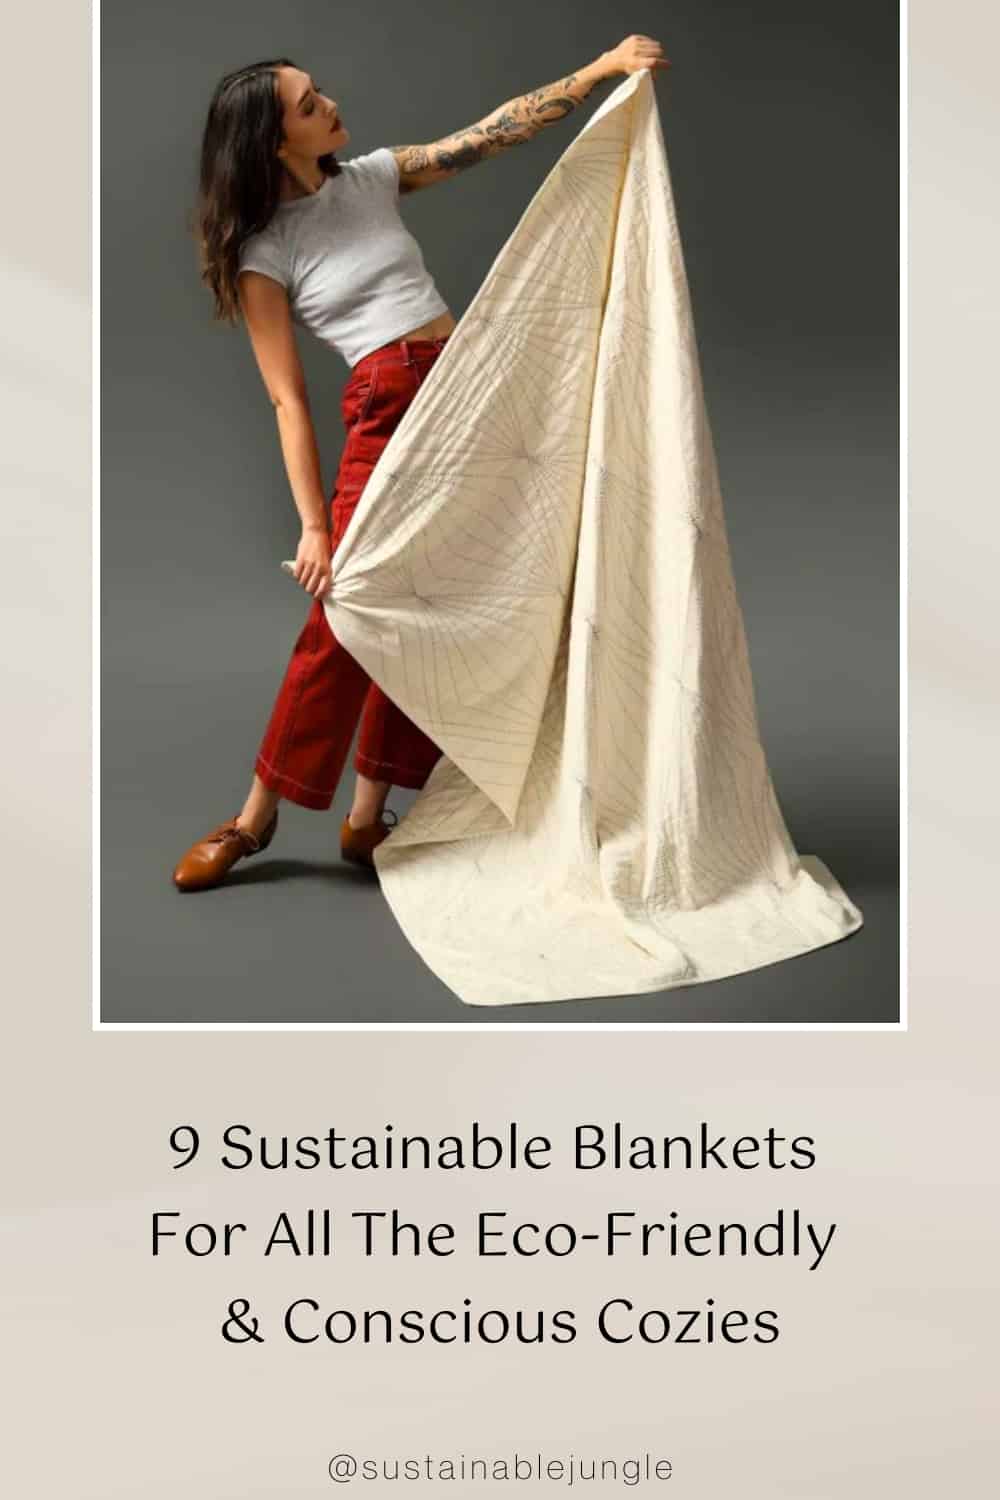 9 Sustainable Blankets For All The Eco-Friendly & Conscious Cozies Image by Anchal #sustainableblankets #sustainablethrowblankets #ecofriendlyblankets #ecothrowblanket #sustainableweightedblankets #bestsustainableblankets #sustainablejungle